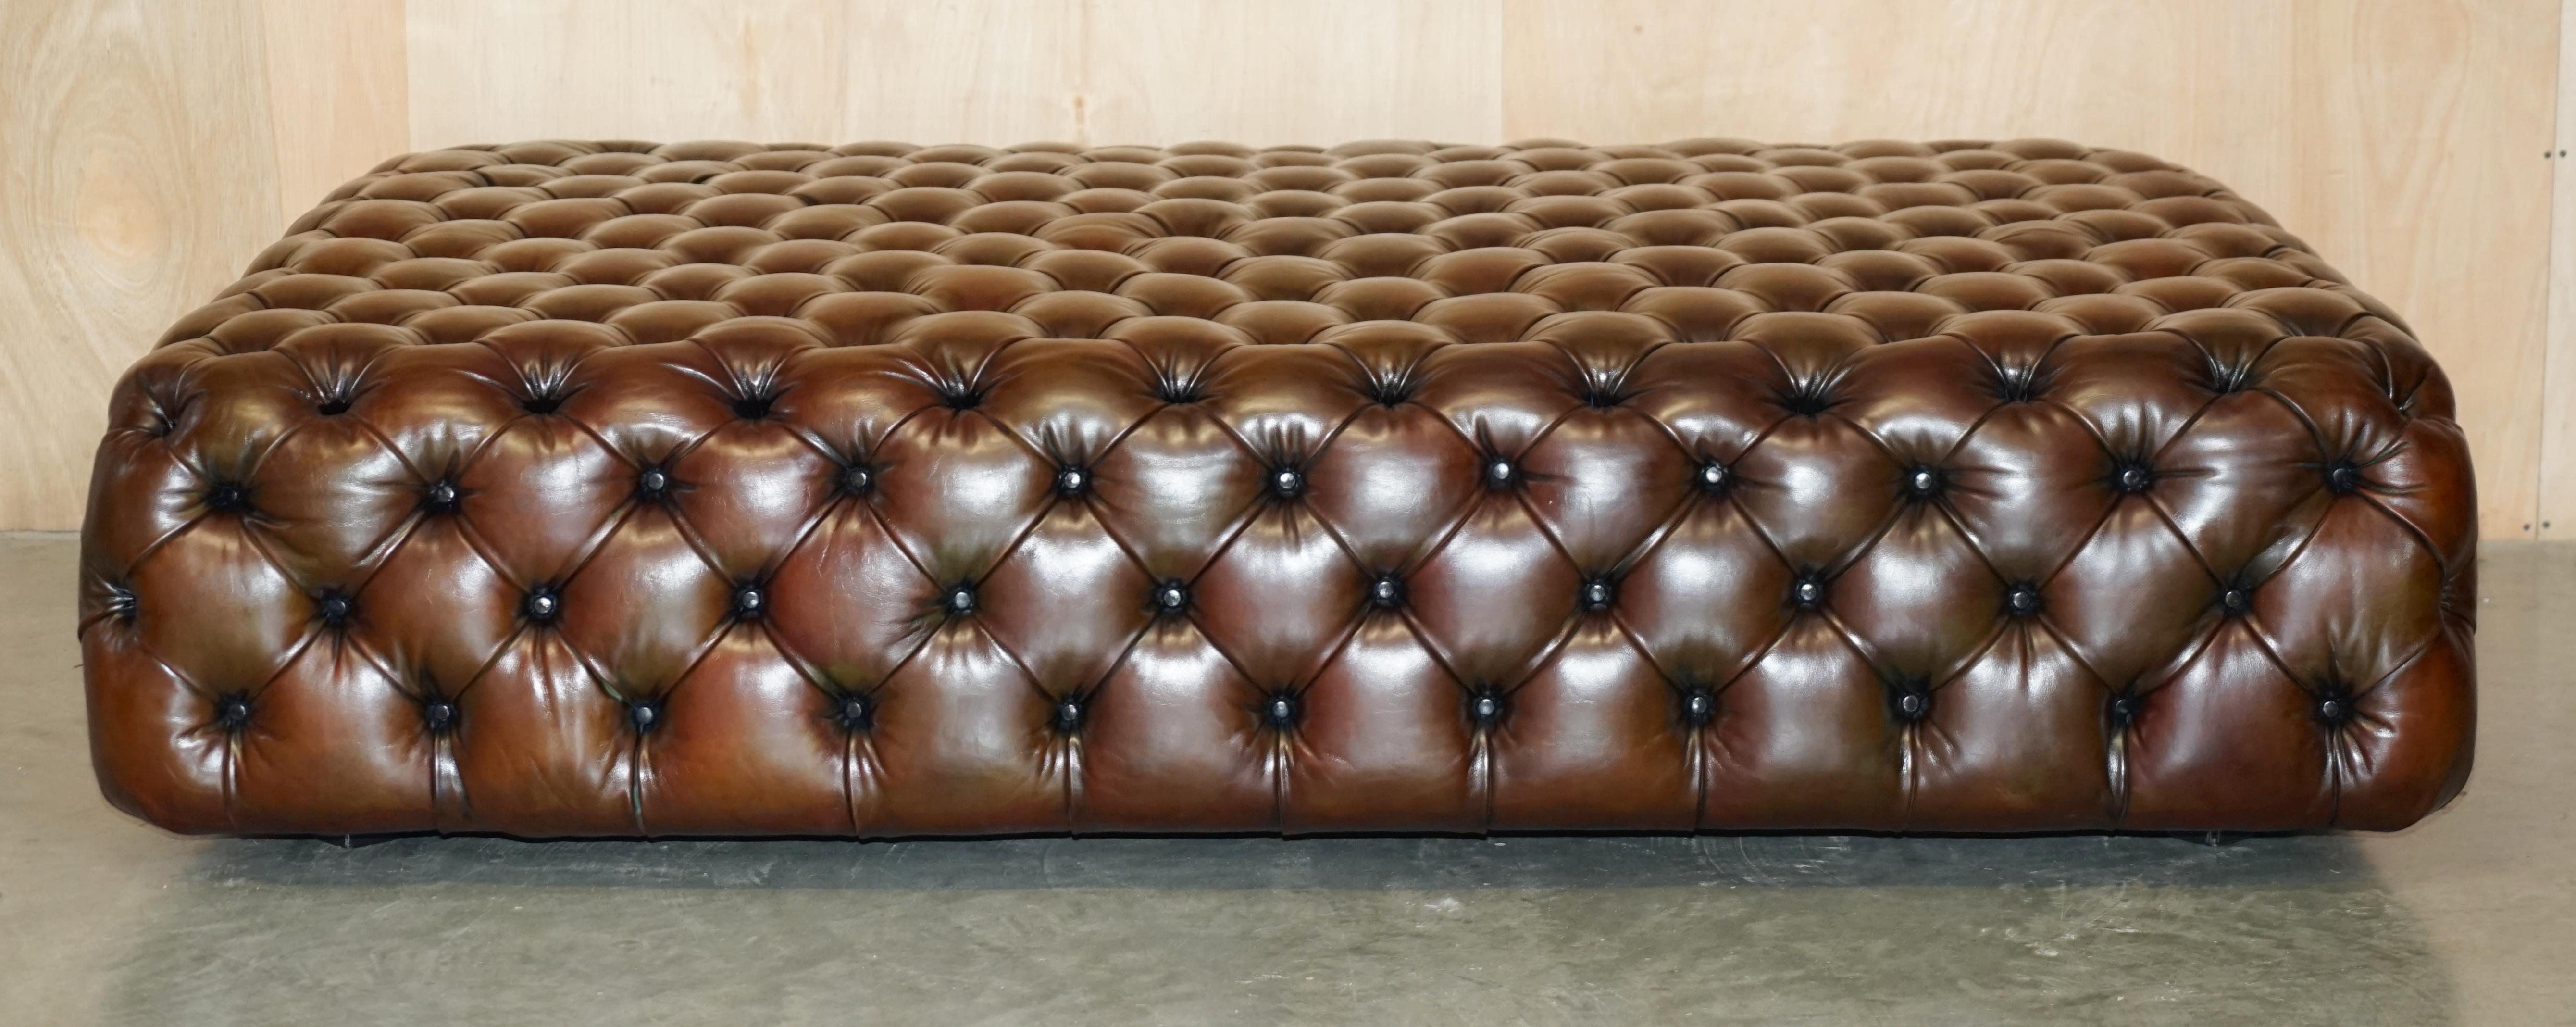 MONUMENTAL GEORGE SMITH RESTORED BROWN LEATHER CHESTERFiELD FOOTSTOOL OTTOMAN For Sale 10